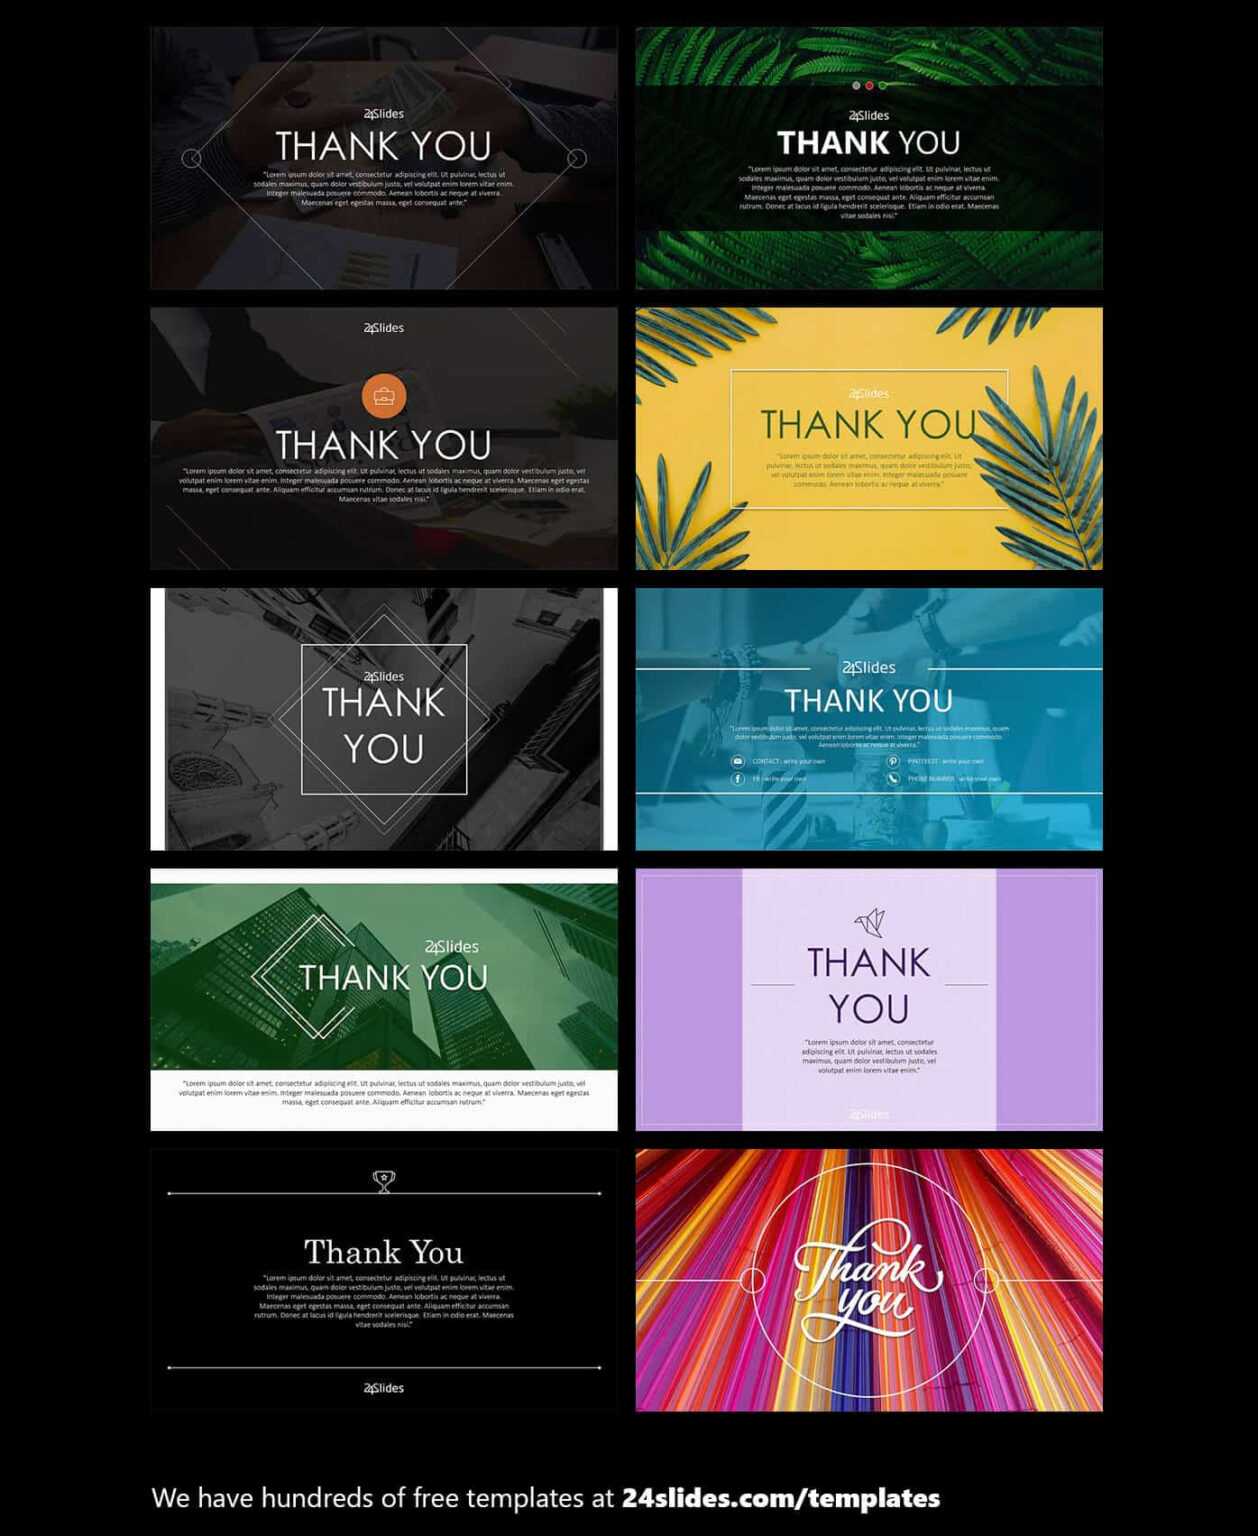 15 Fun And Colorful Free Powerpoint Templates Present Better